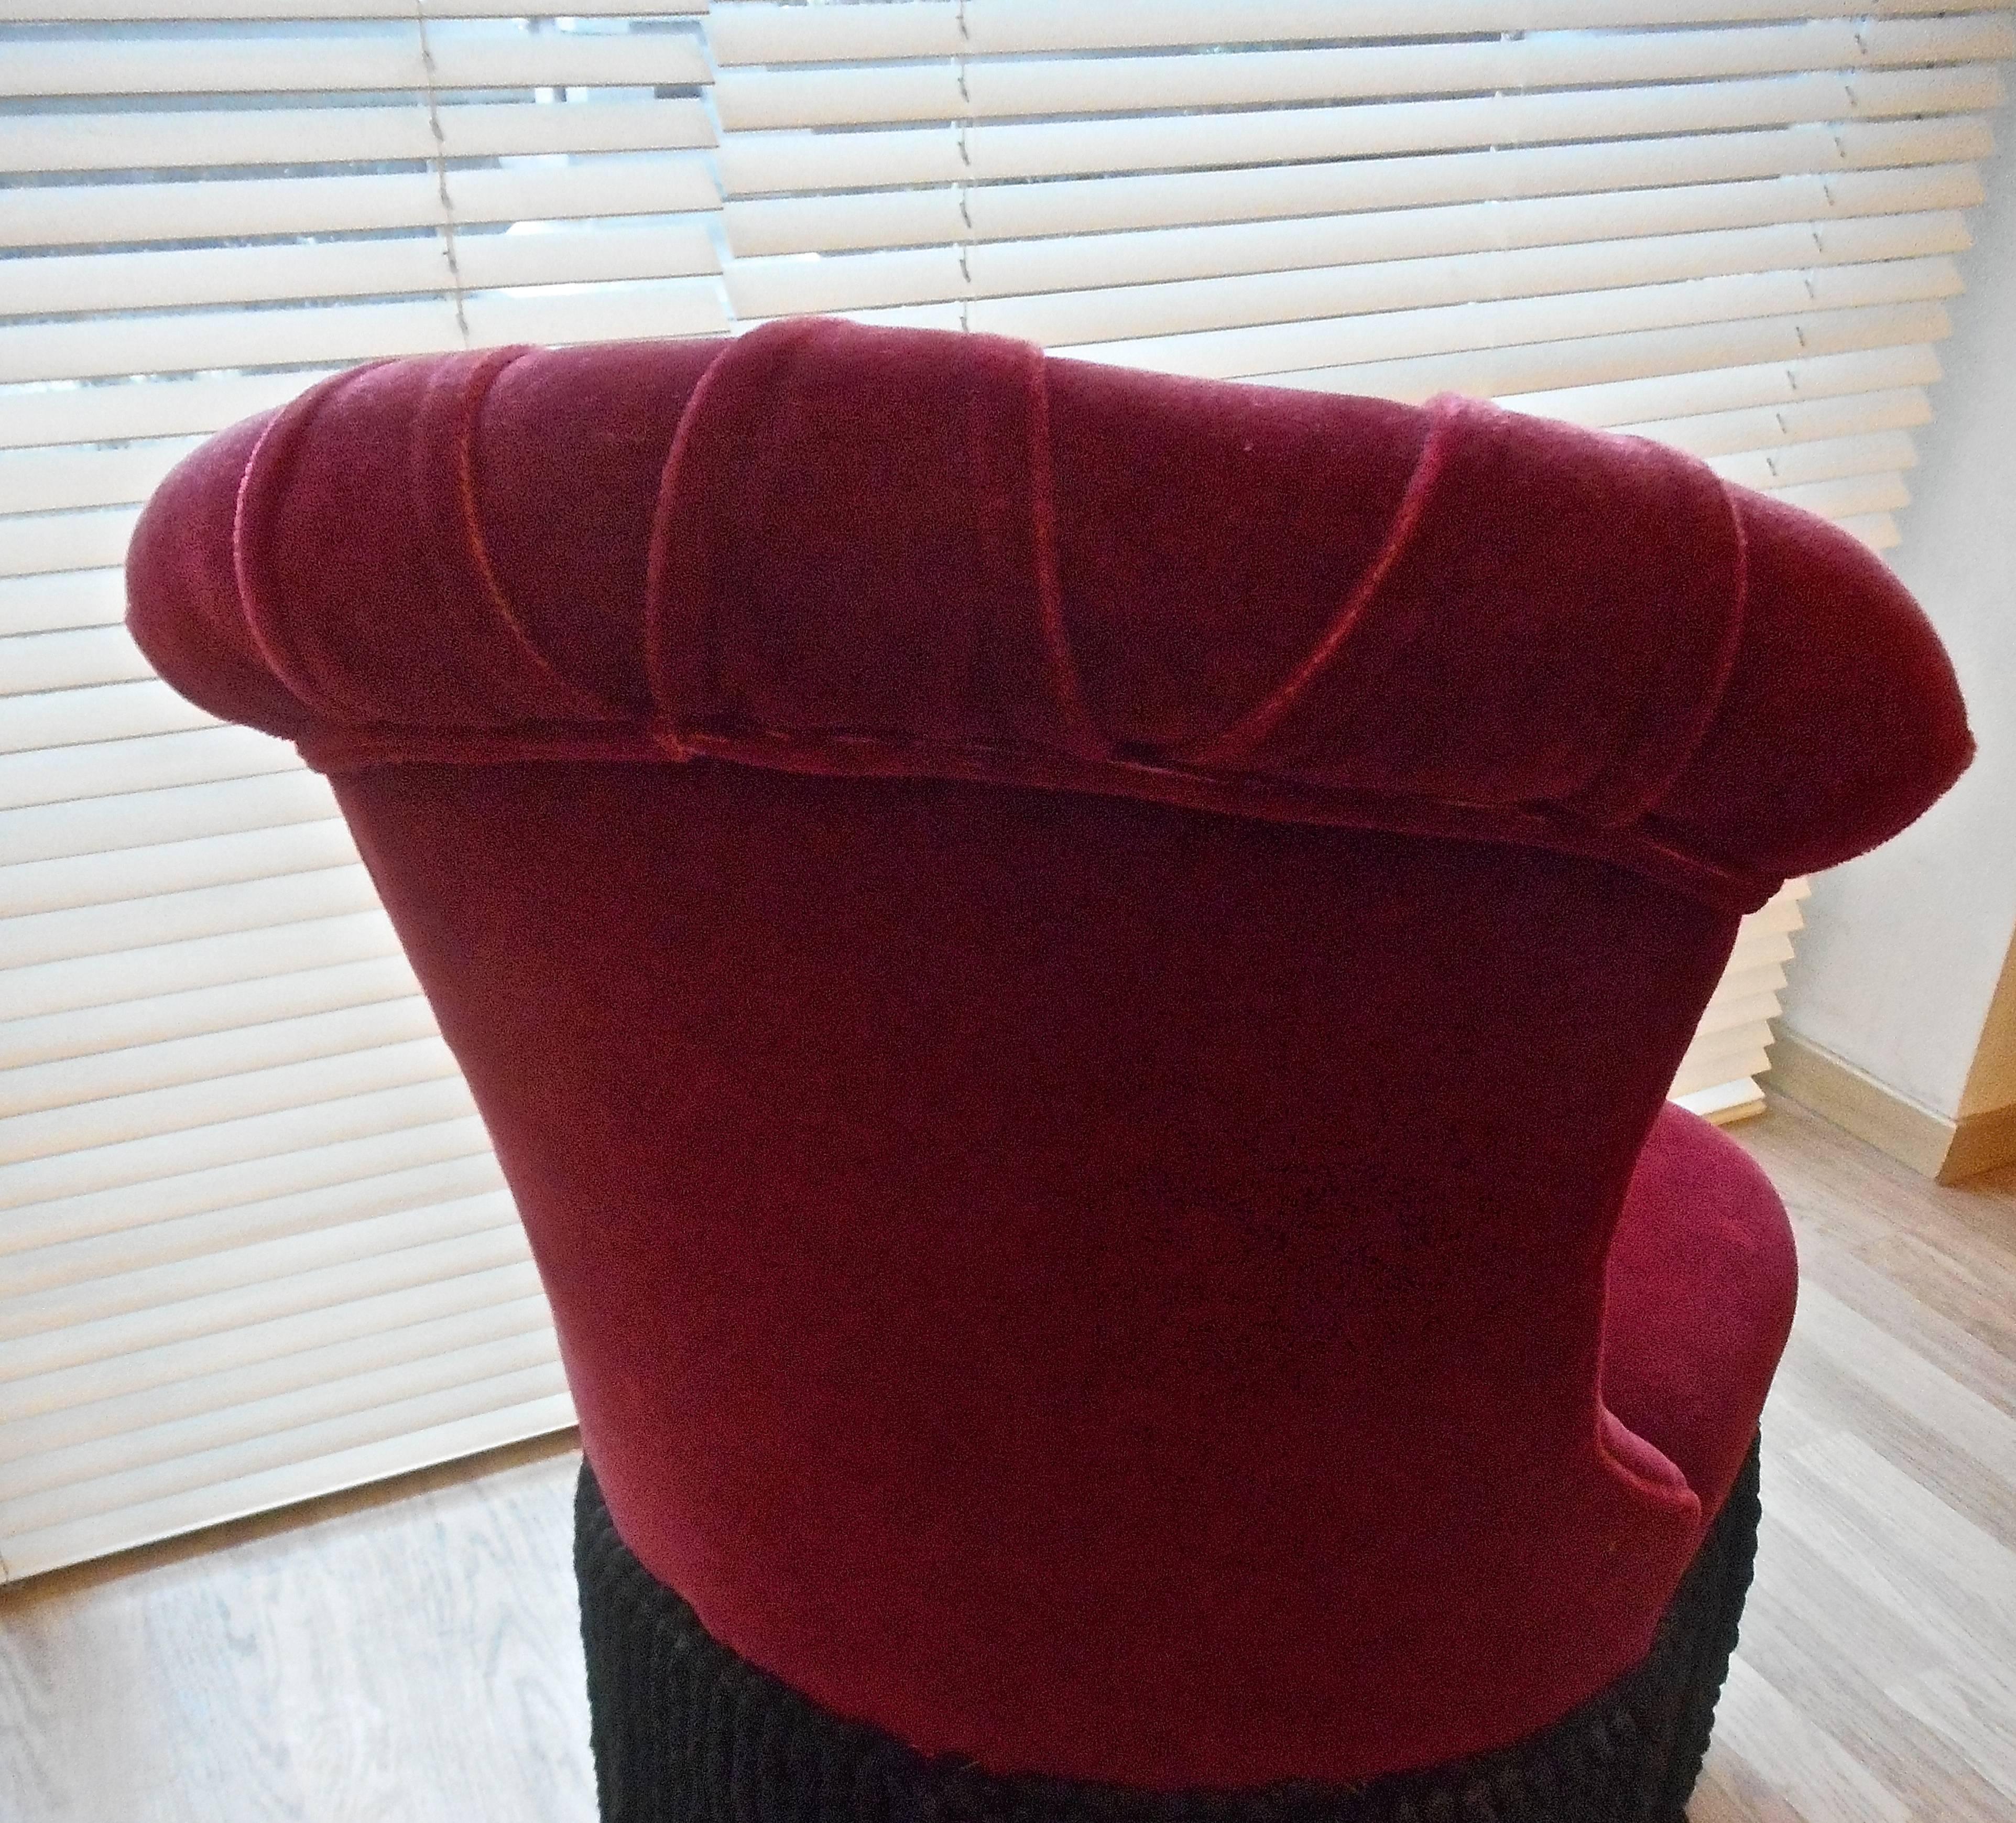 Mid-20th Century 1940s Red Velvet Chair by Dorothy Draper for The Fairmount in S.F. For Sale